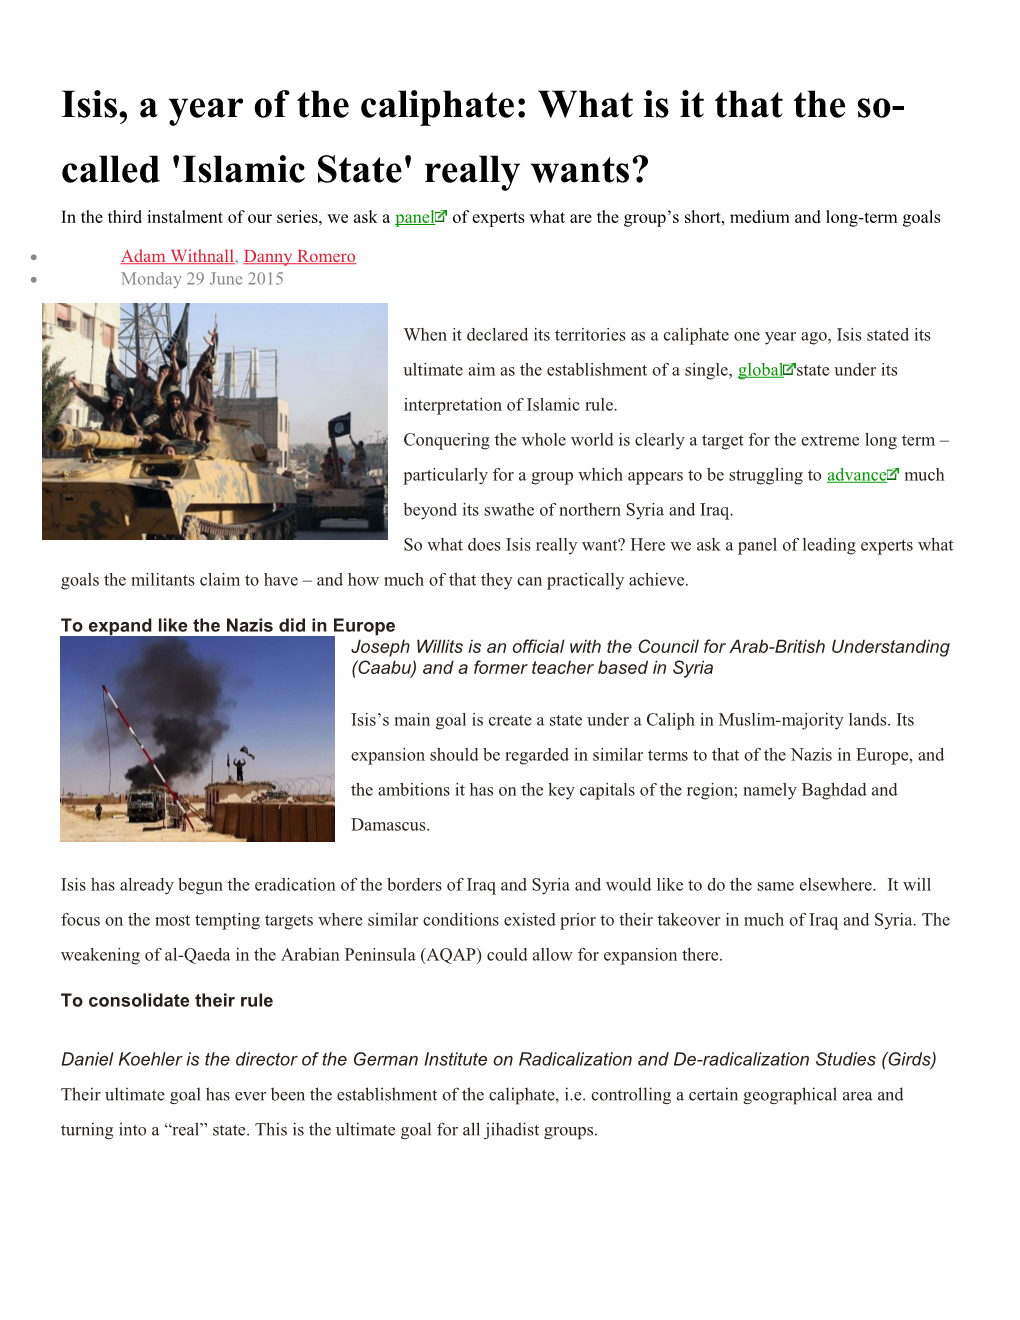 Isis, a Year of the Caliphate: What Is It That the So-Called 'Islamic State' Really Wants?